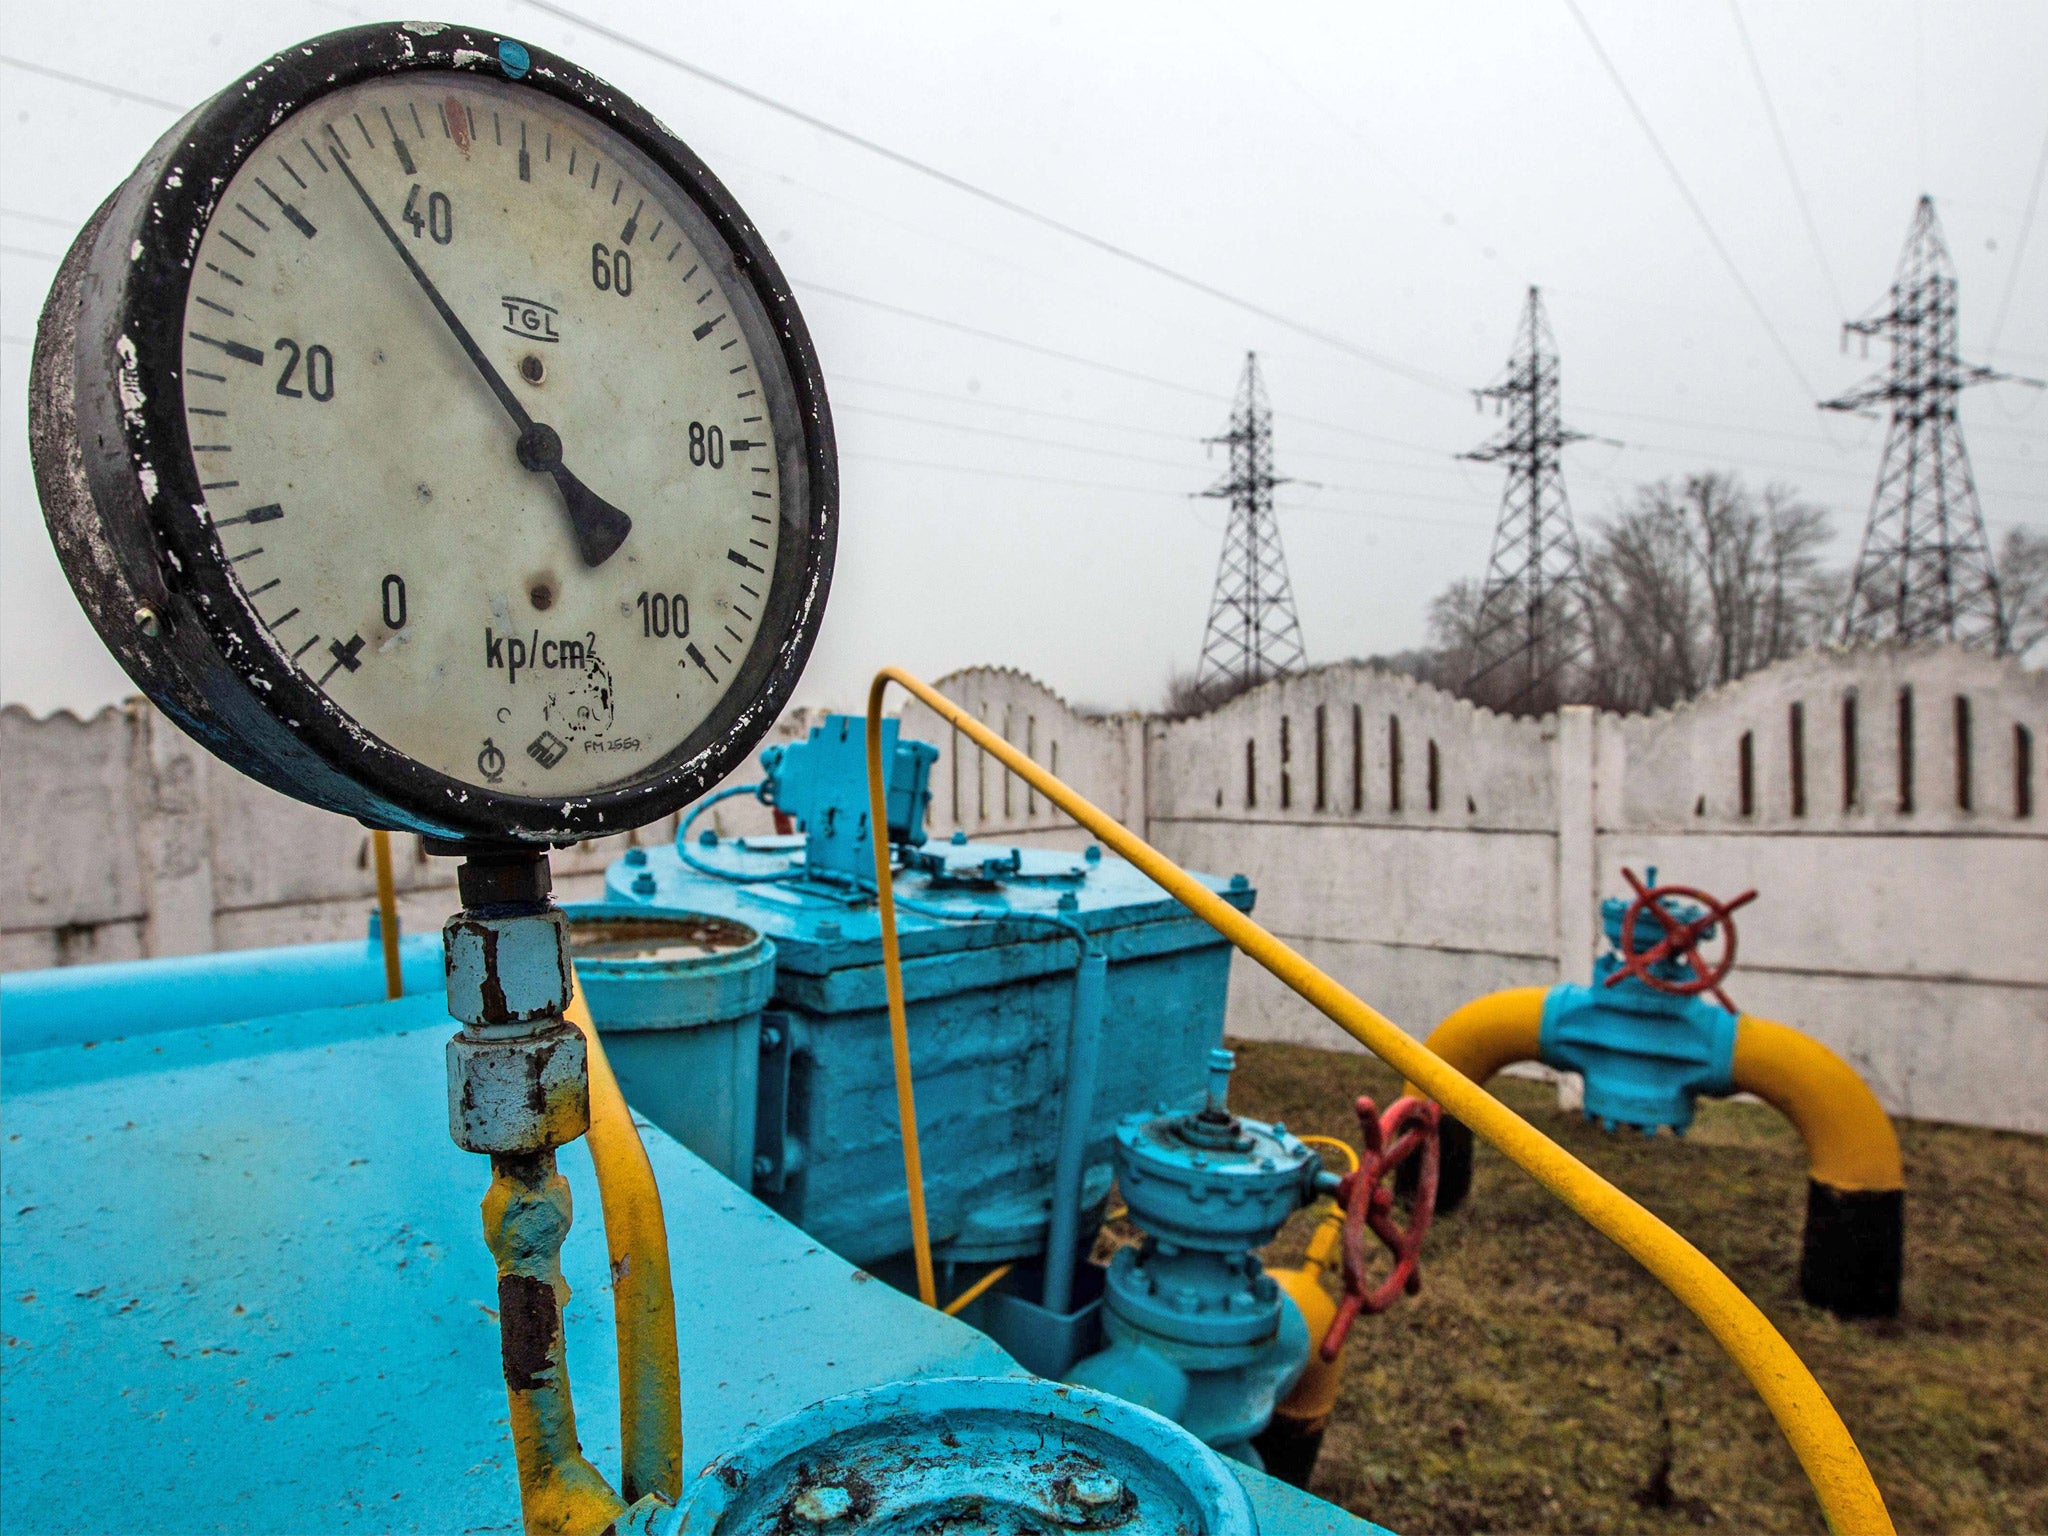 Ukraine has run up huge debts to Russia over natural gas imports